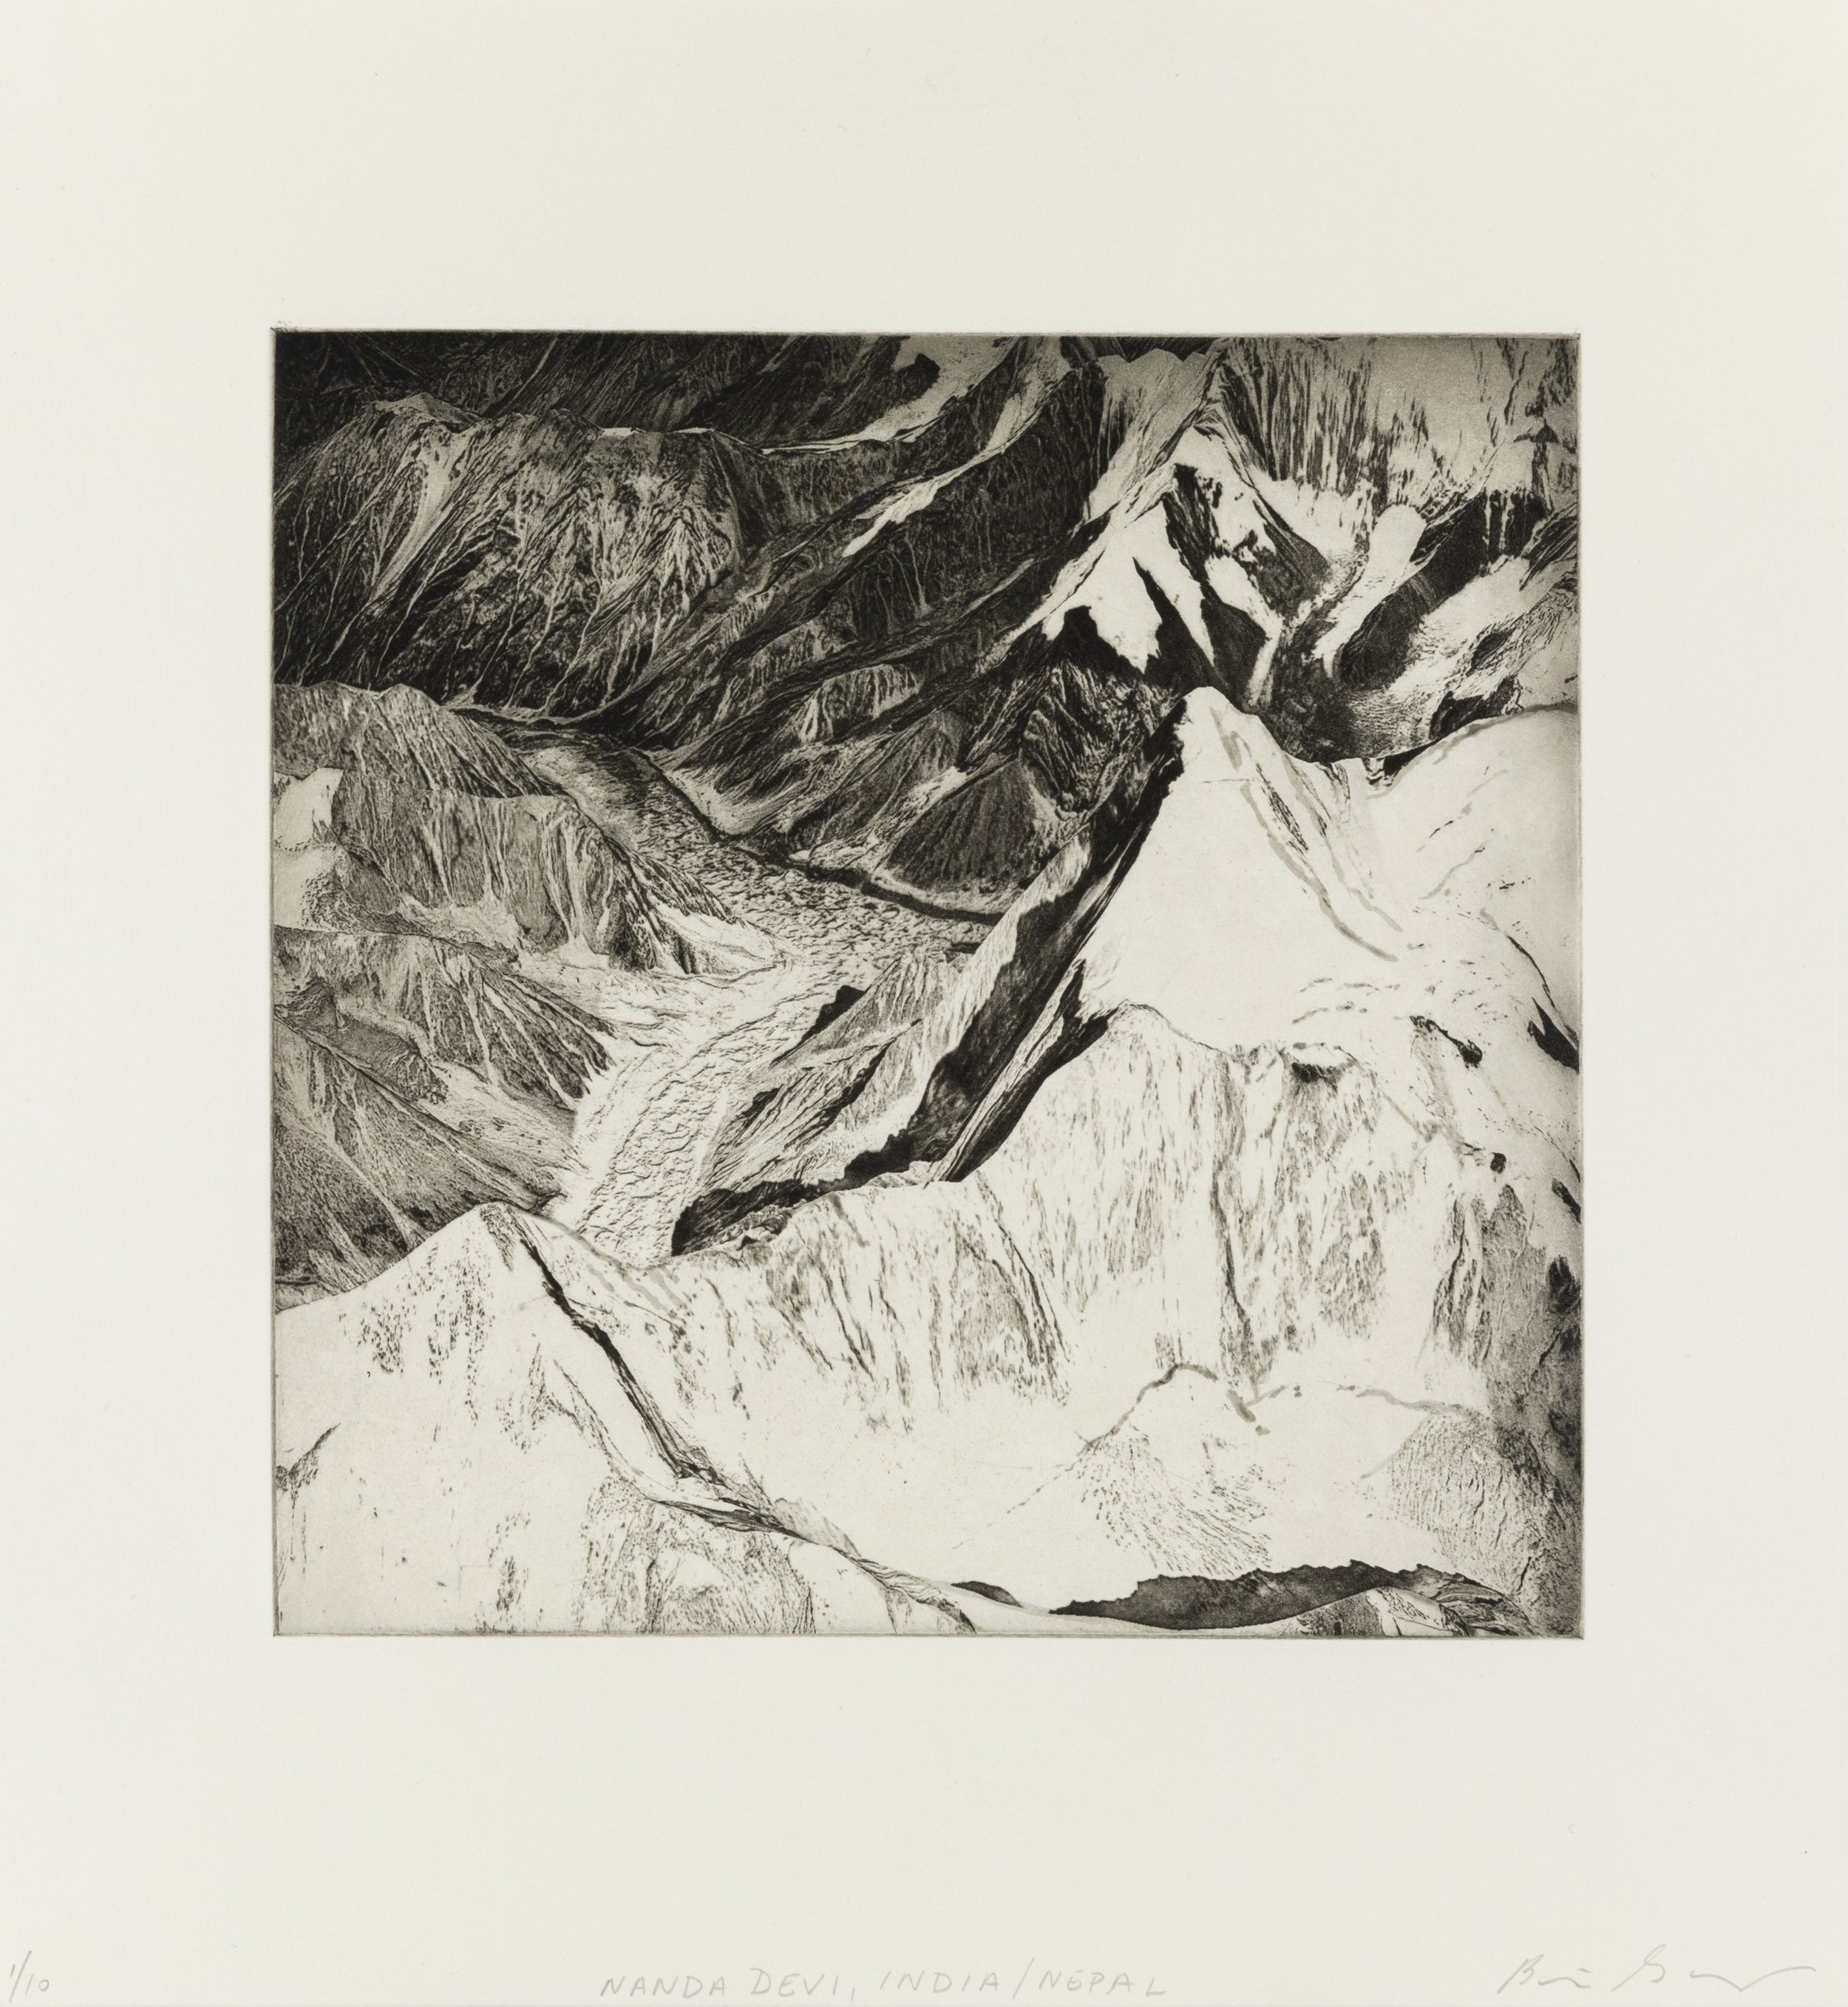    Nanda Devi, India/Nepal, 2022   Copperplate photogravure etching on cotton rag paper, plate size; 10.6 x 10.6, paper size; 16 x 15.5, edition 10  